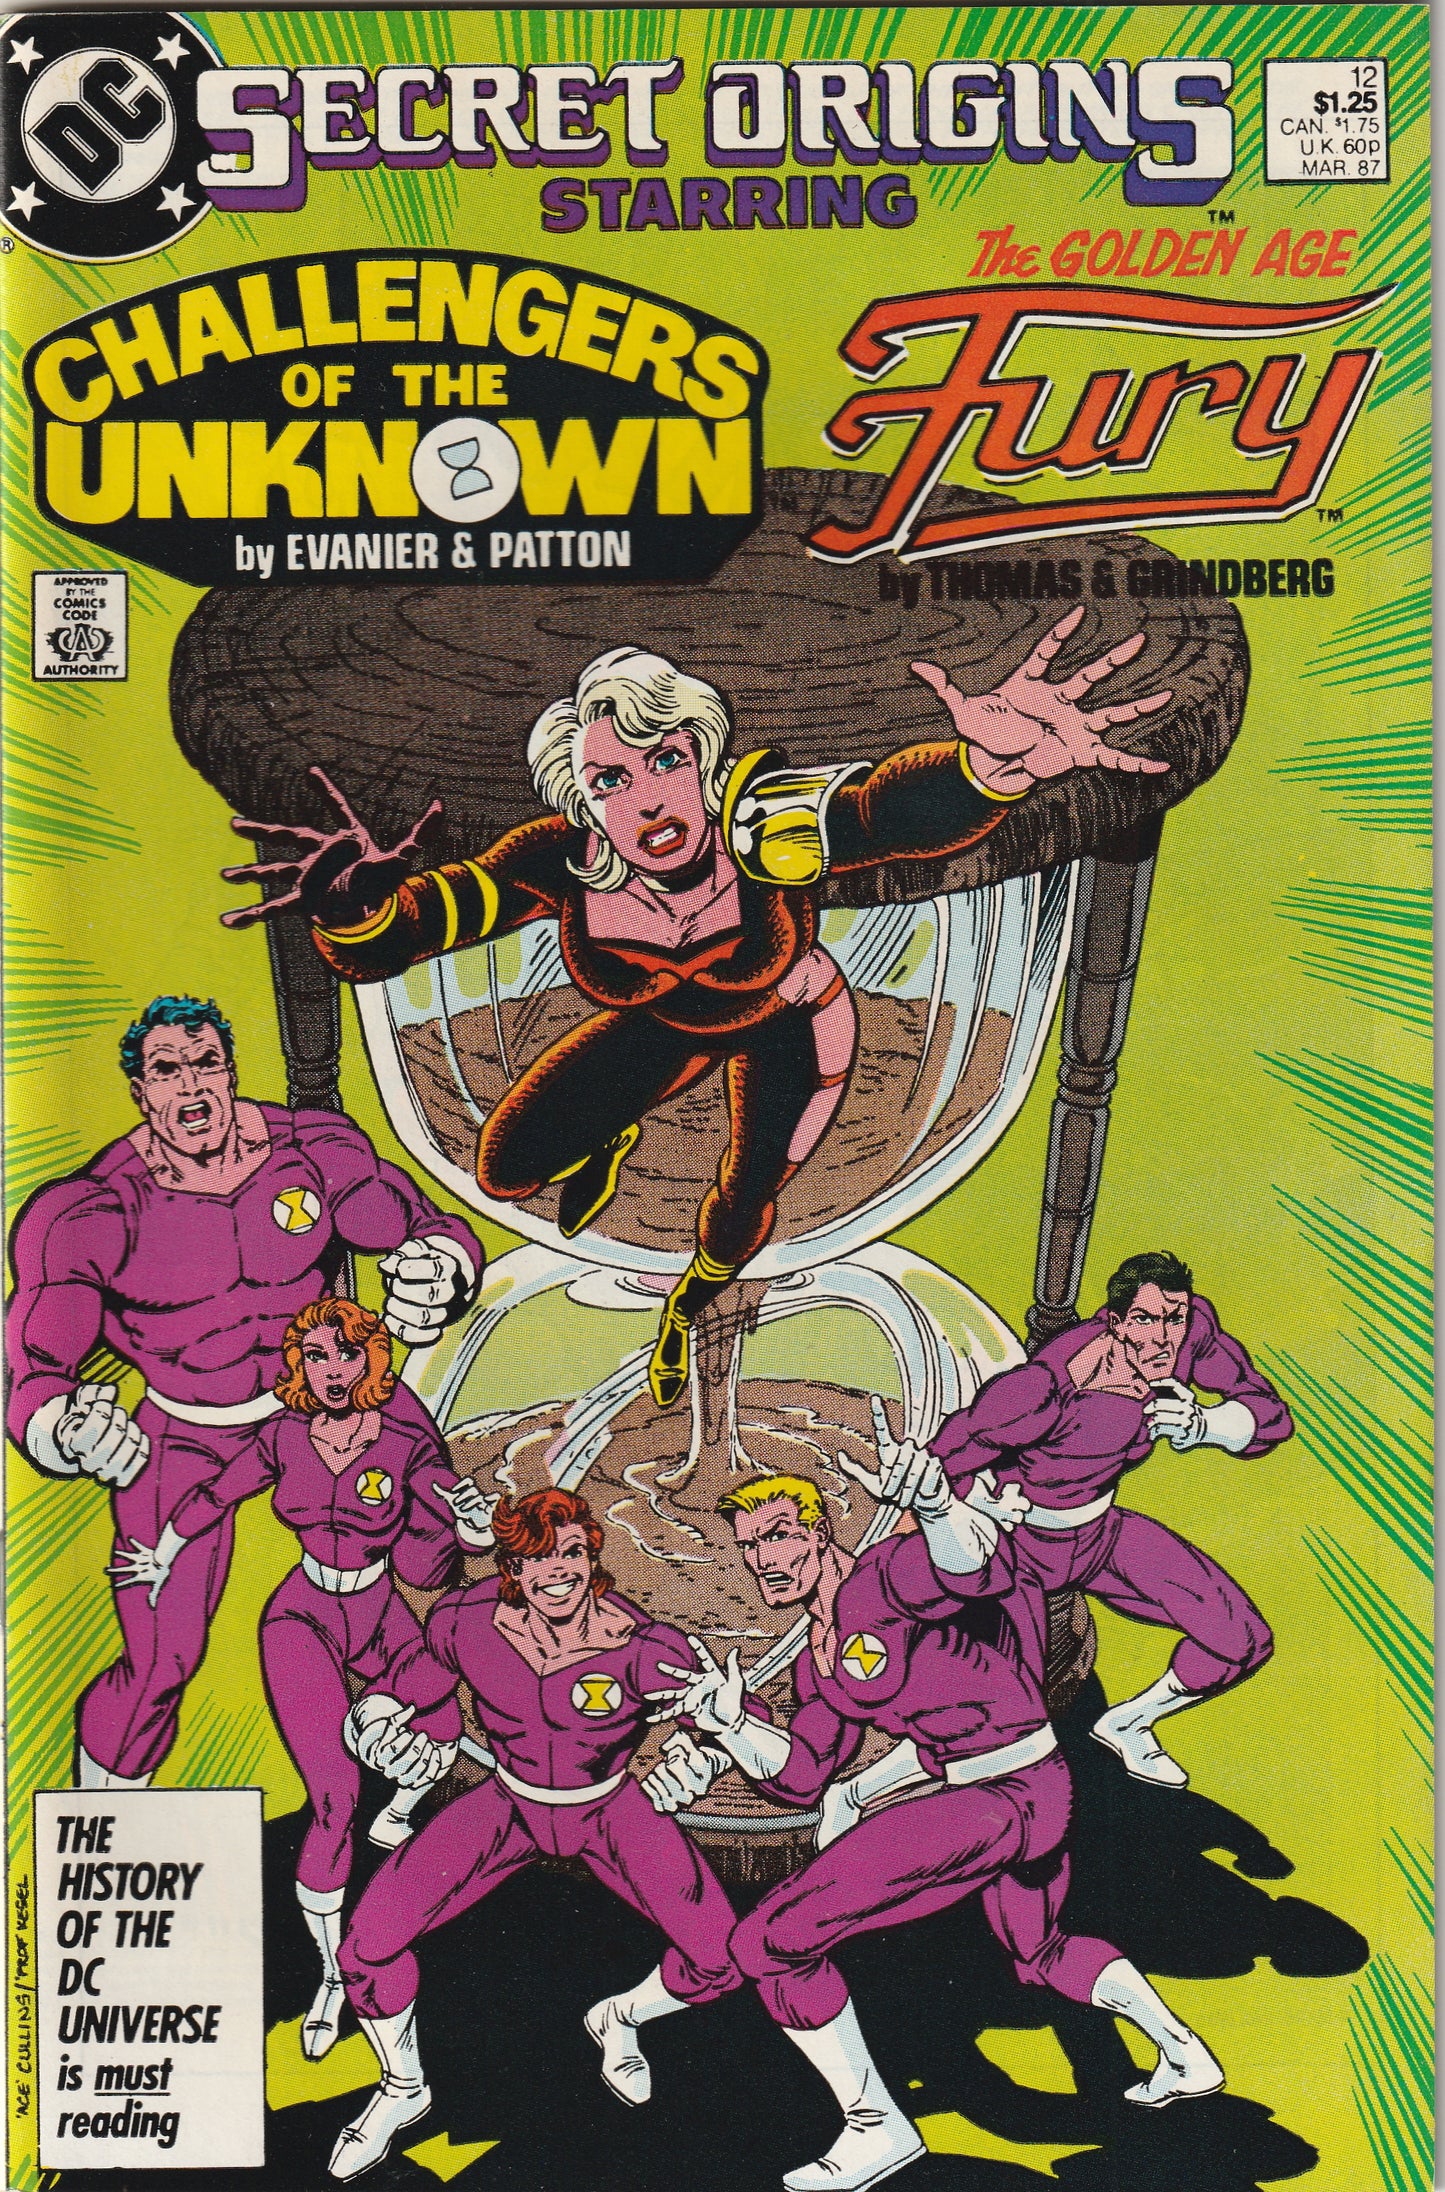 Secret Origins #12 (1987) - Challengers of the Unknown & The Golden Age Fury